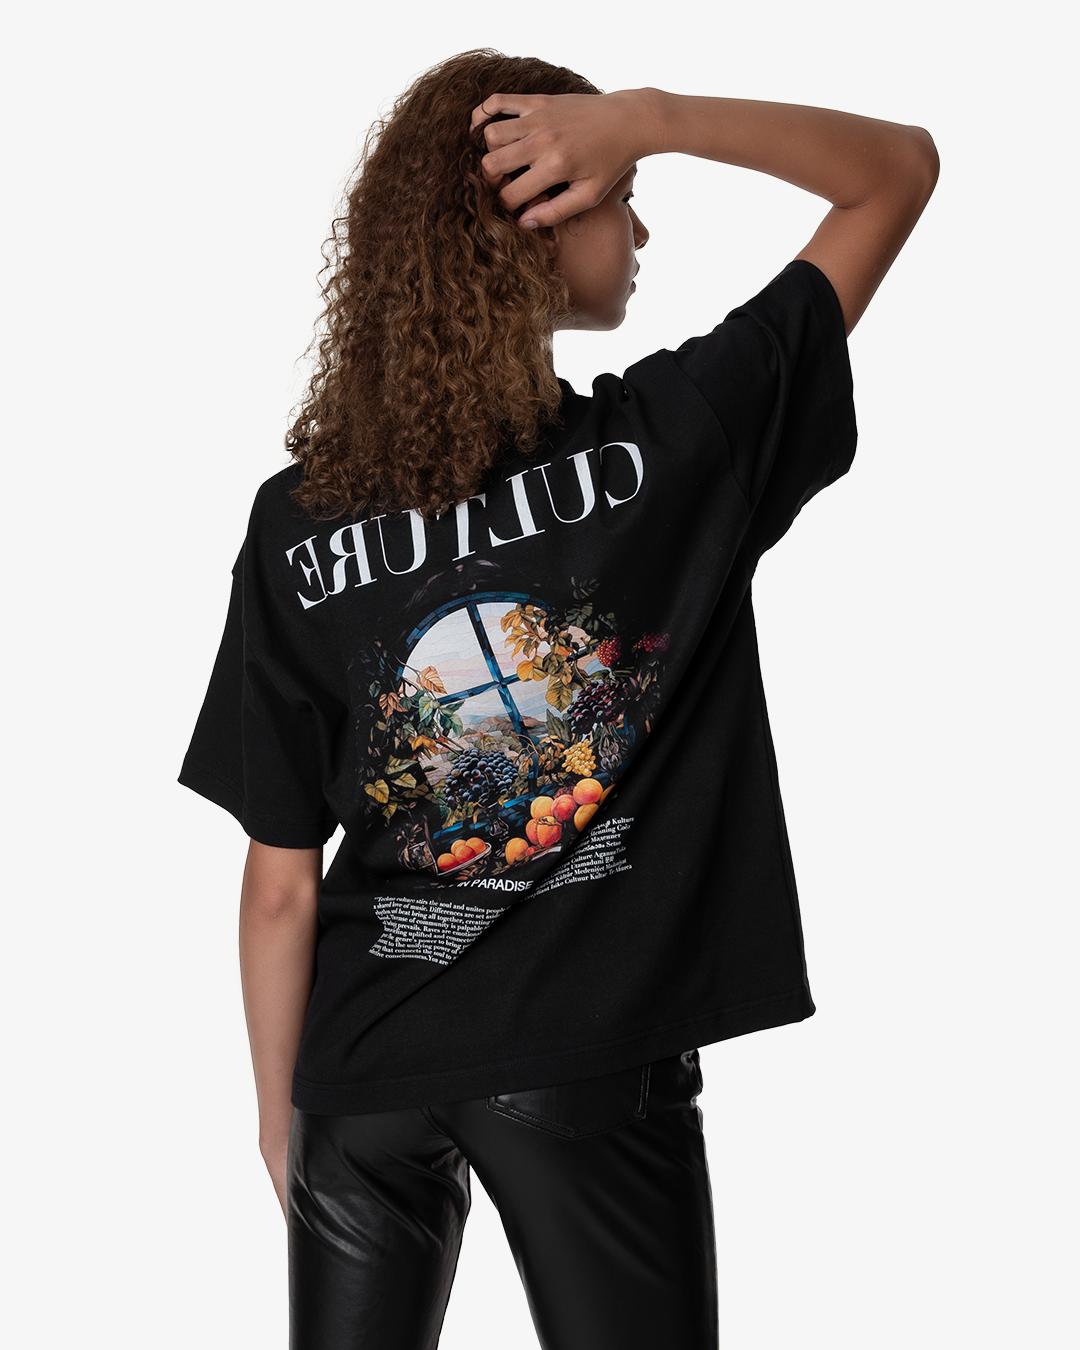 Customized Culture black rave outfit t-shirt